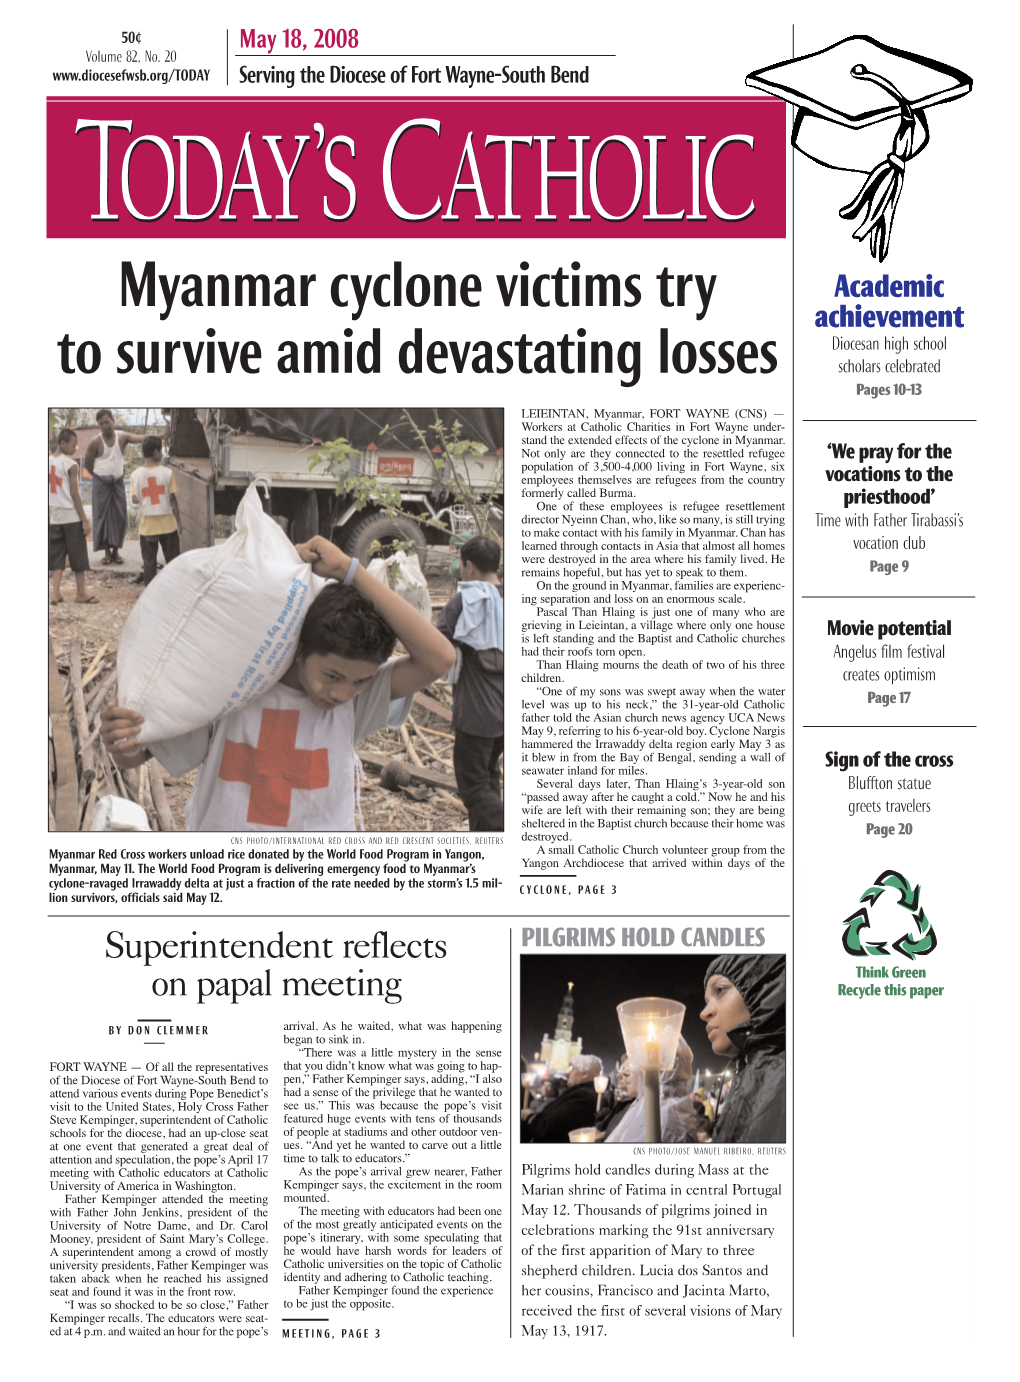 Myanmar Cyclone Victims Try to Survive Amid Devastating Losses